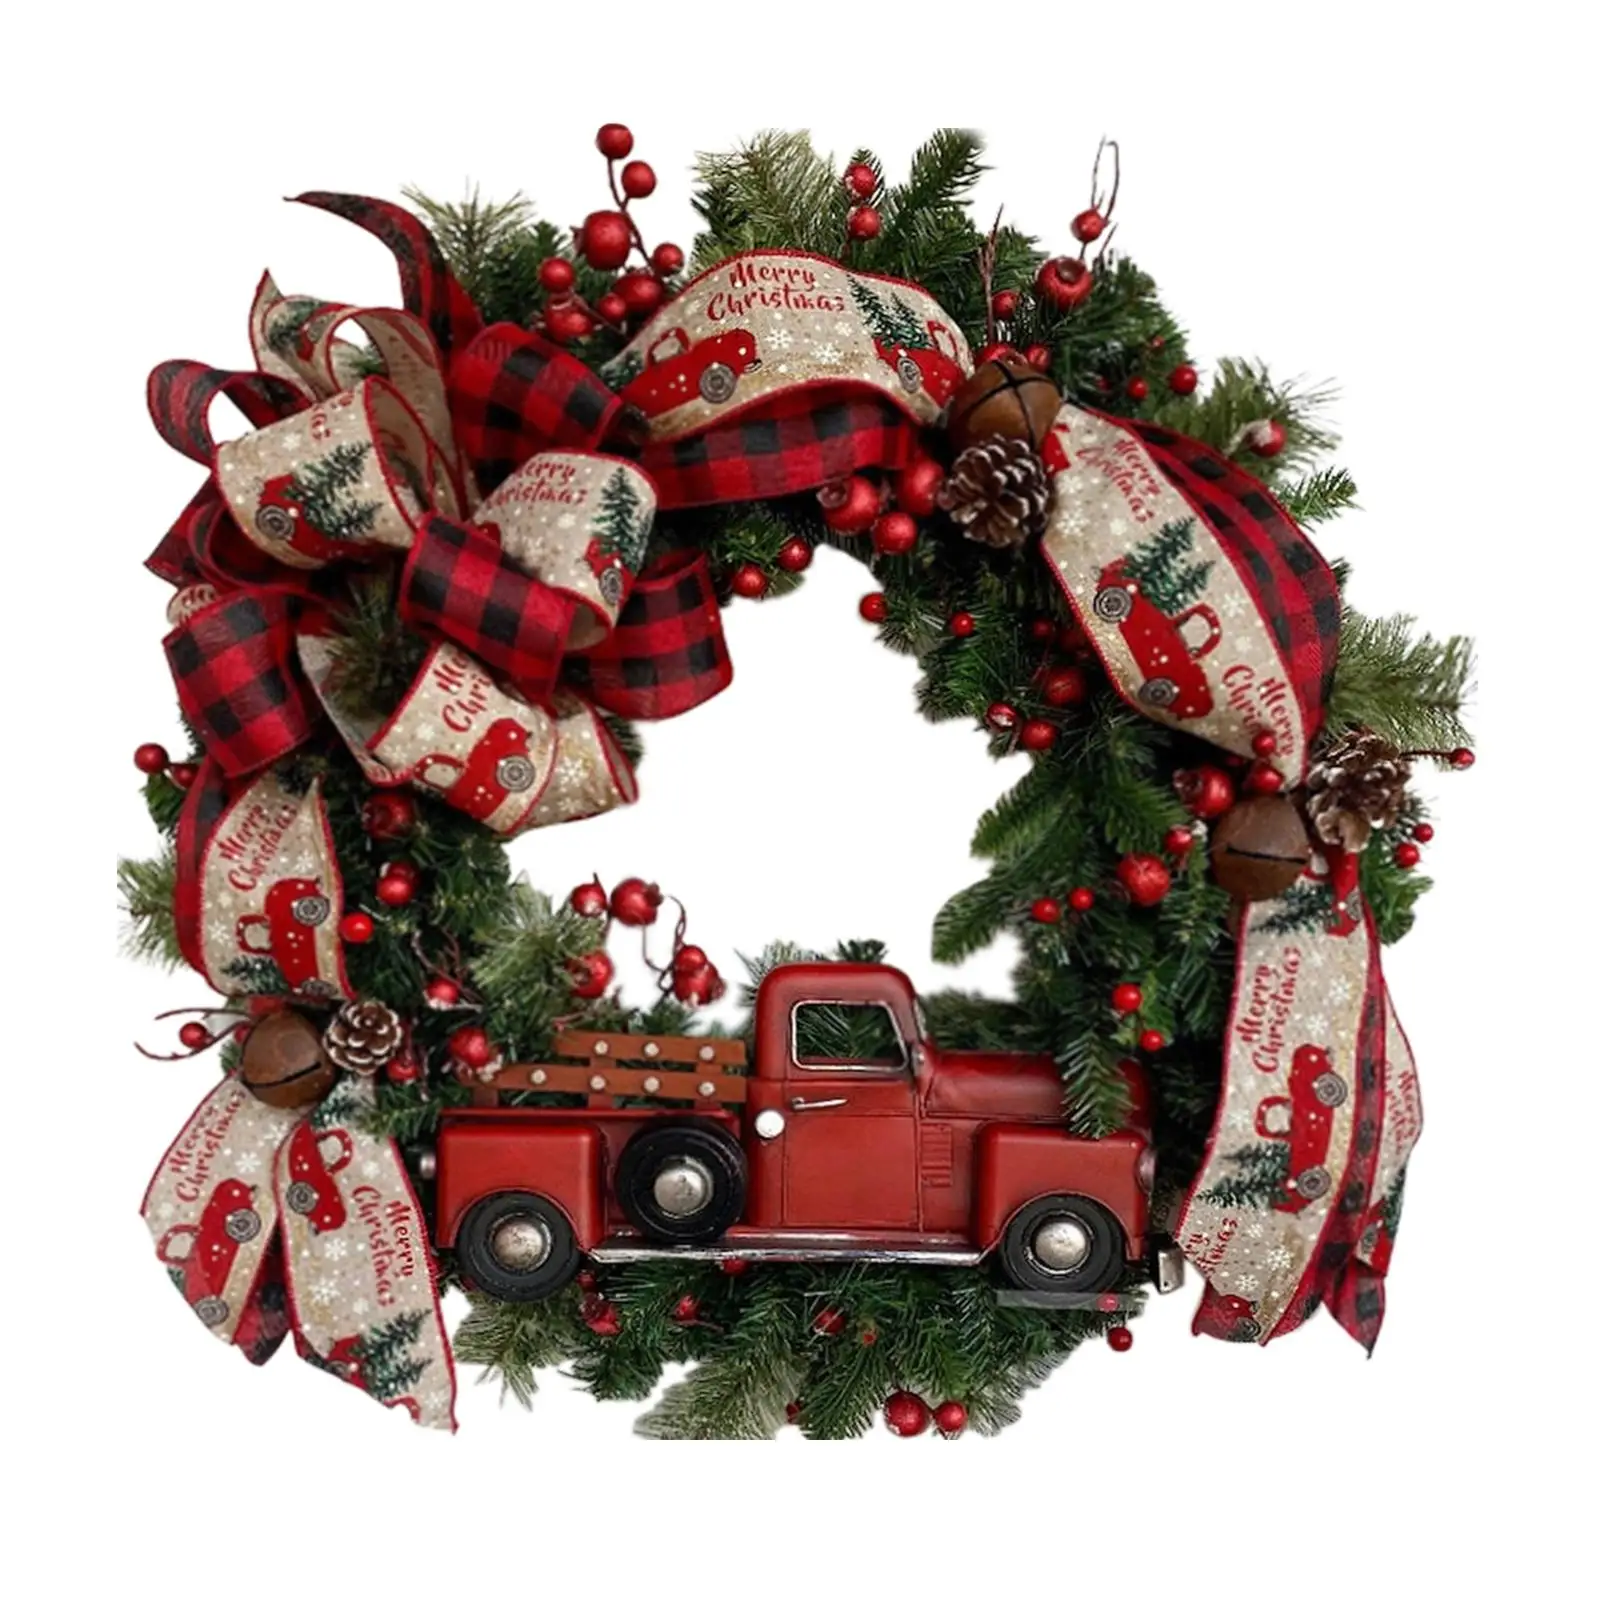 Christmas Artificial Floral Wreath with Red Berries Front Door Wreath Decoration for Celebration Wall Farmhouse Festival Holiday